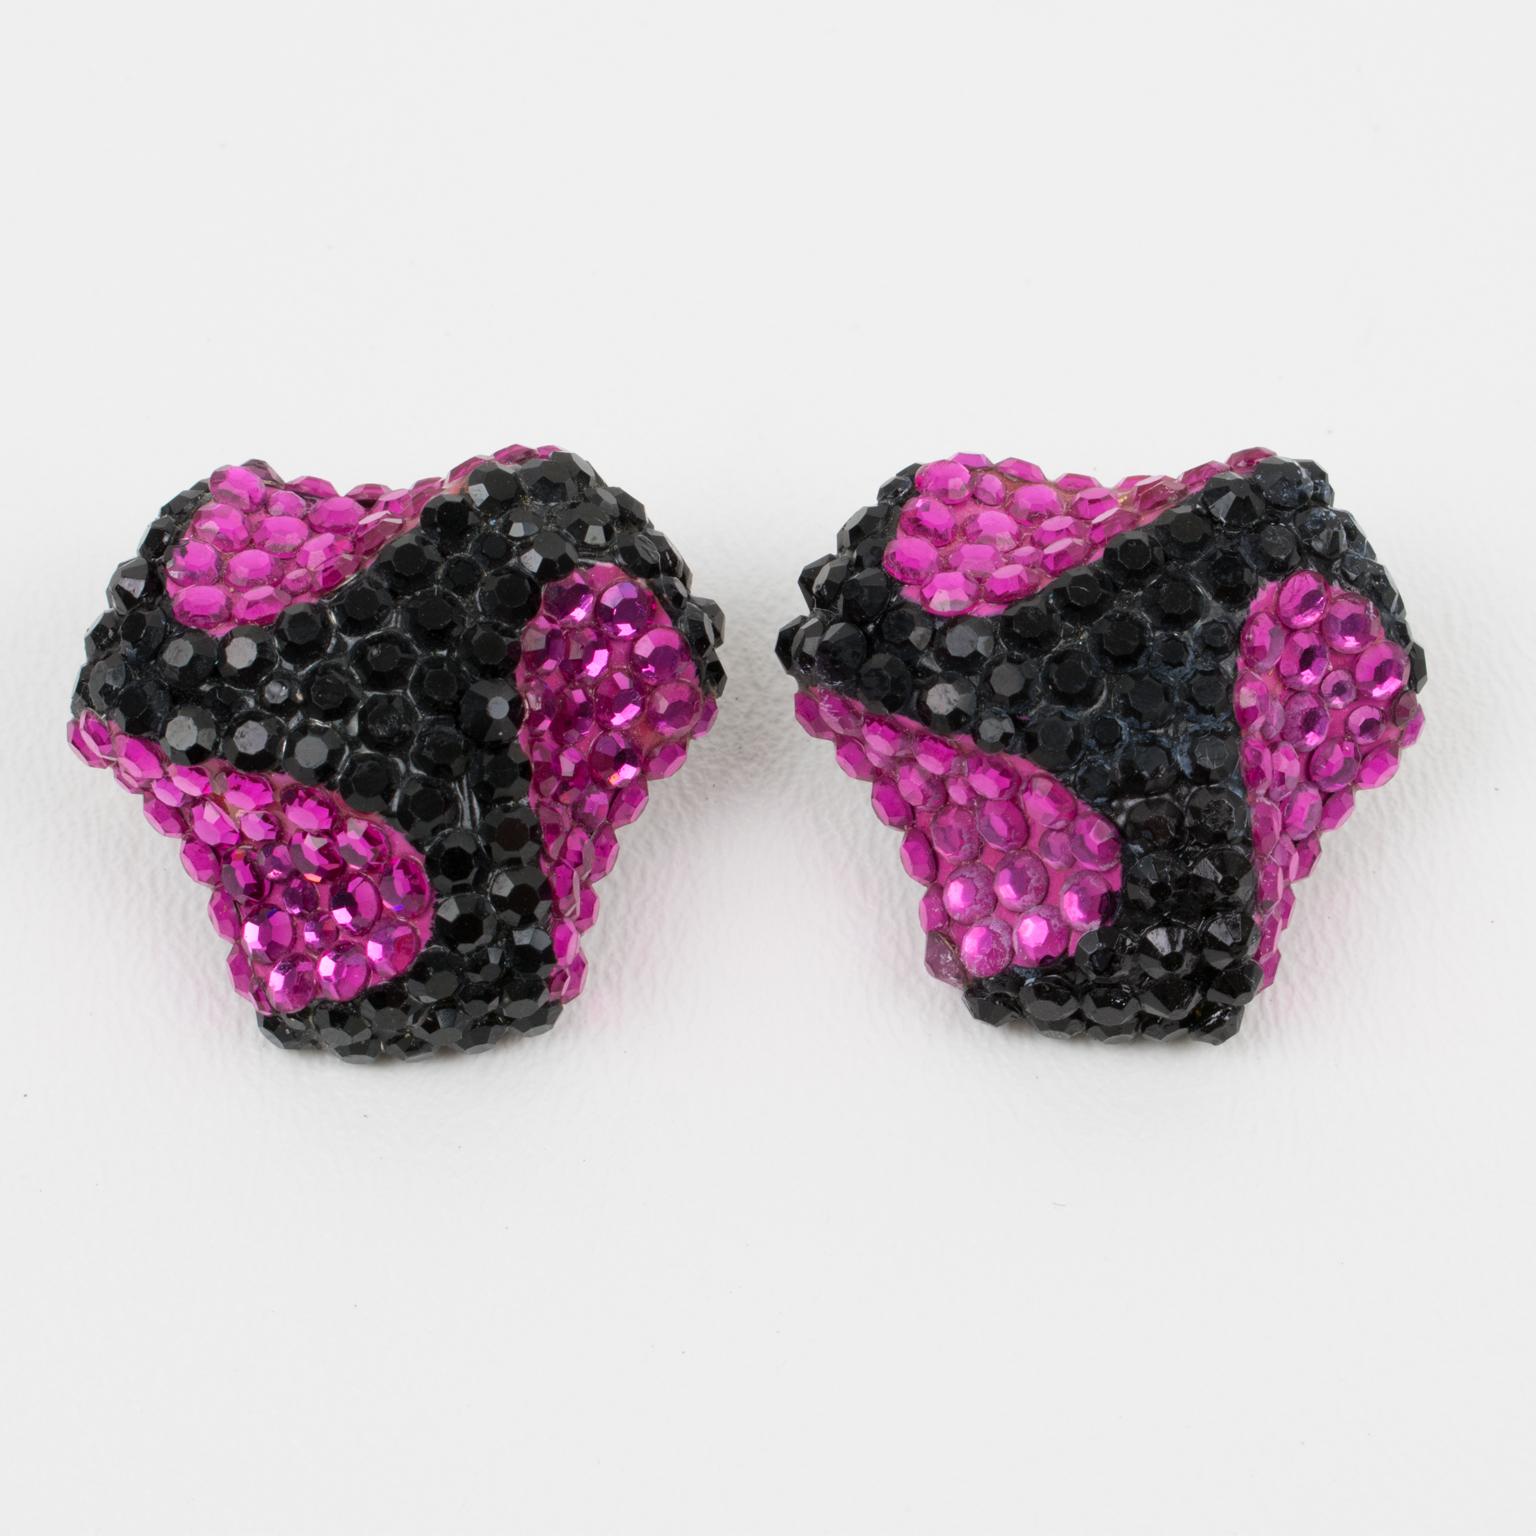 Modern Richard Kerr Clip Earrings Black and Fuchsia Crystal Jeweled Paved For Sale